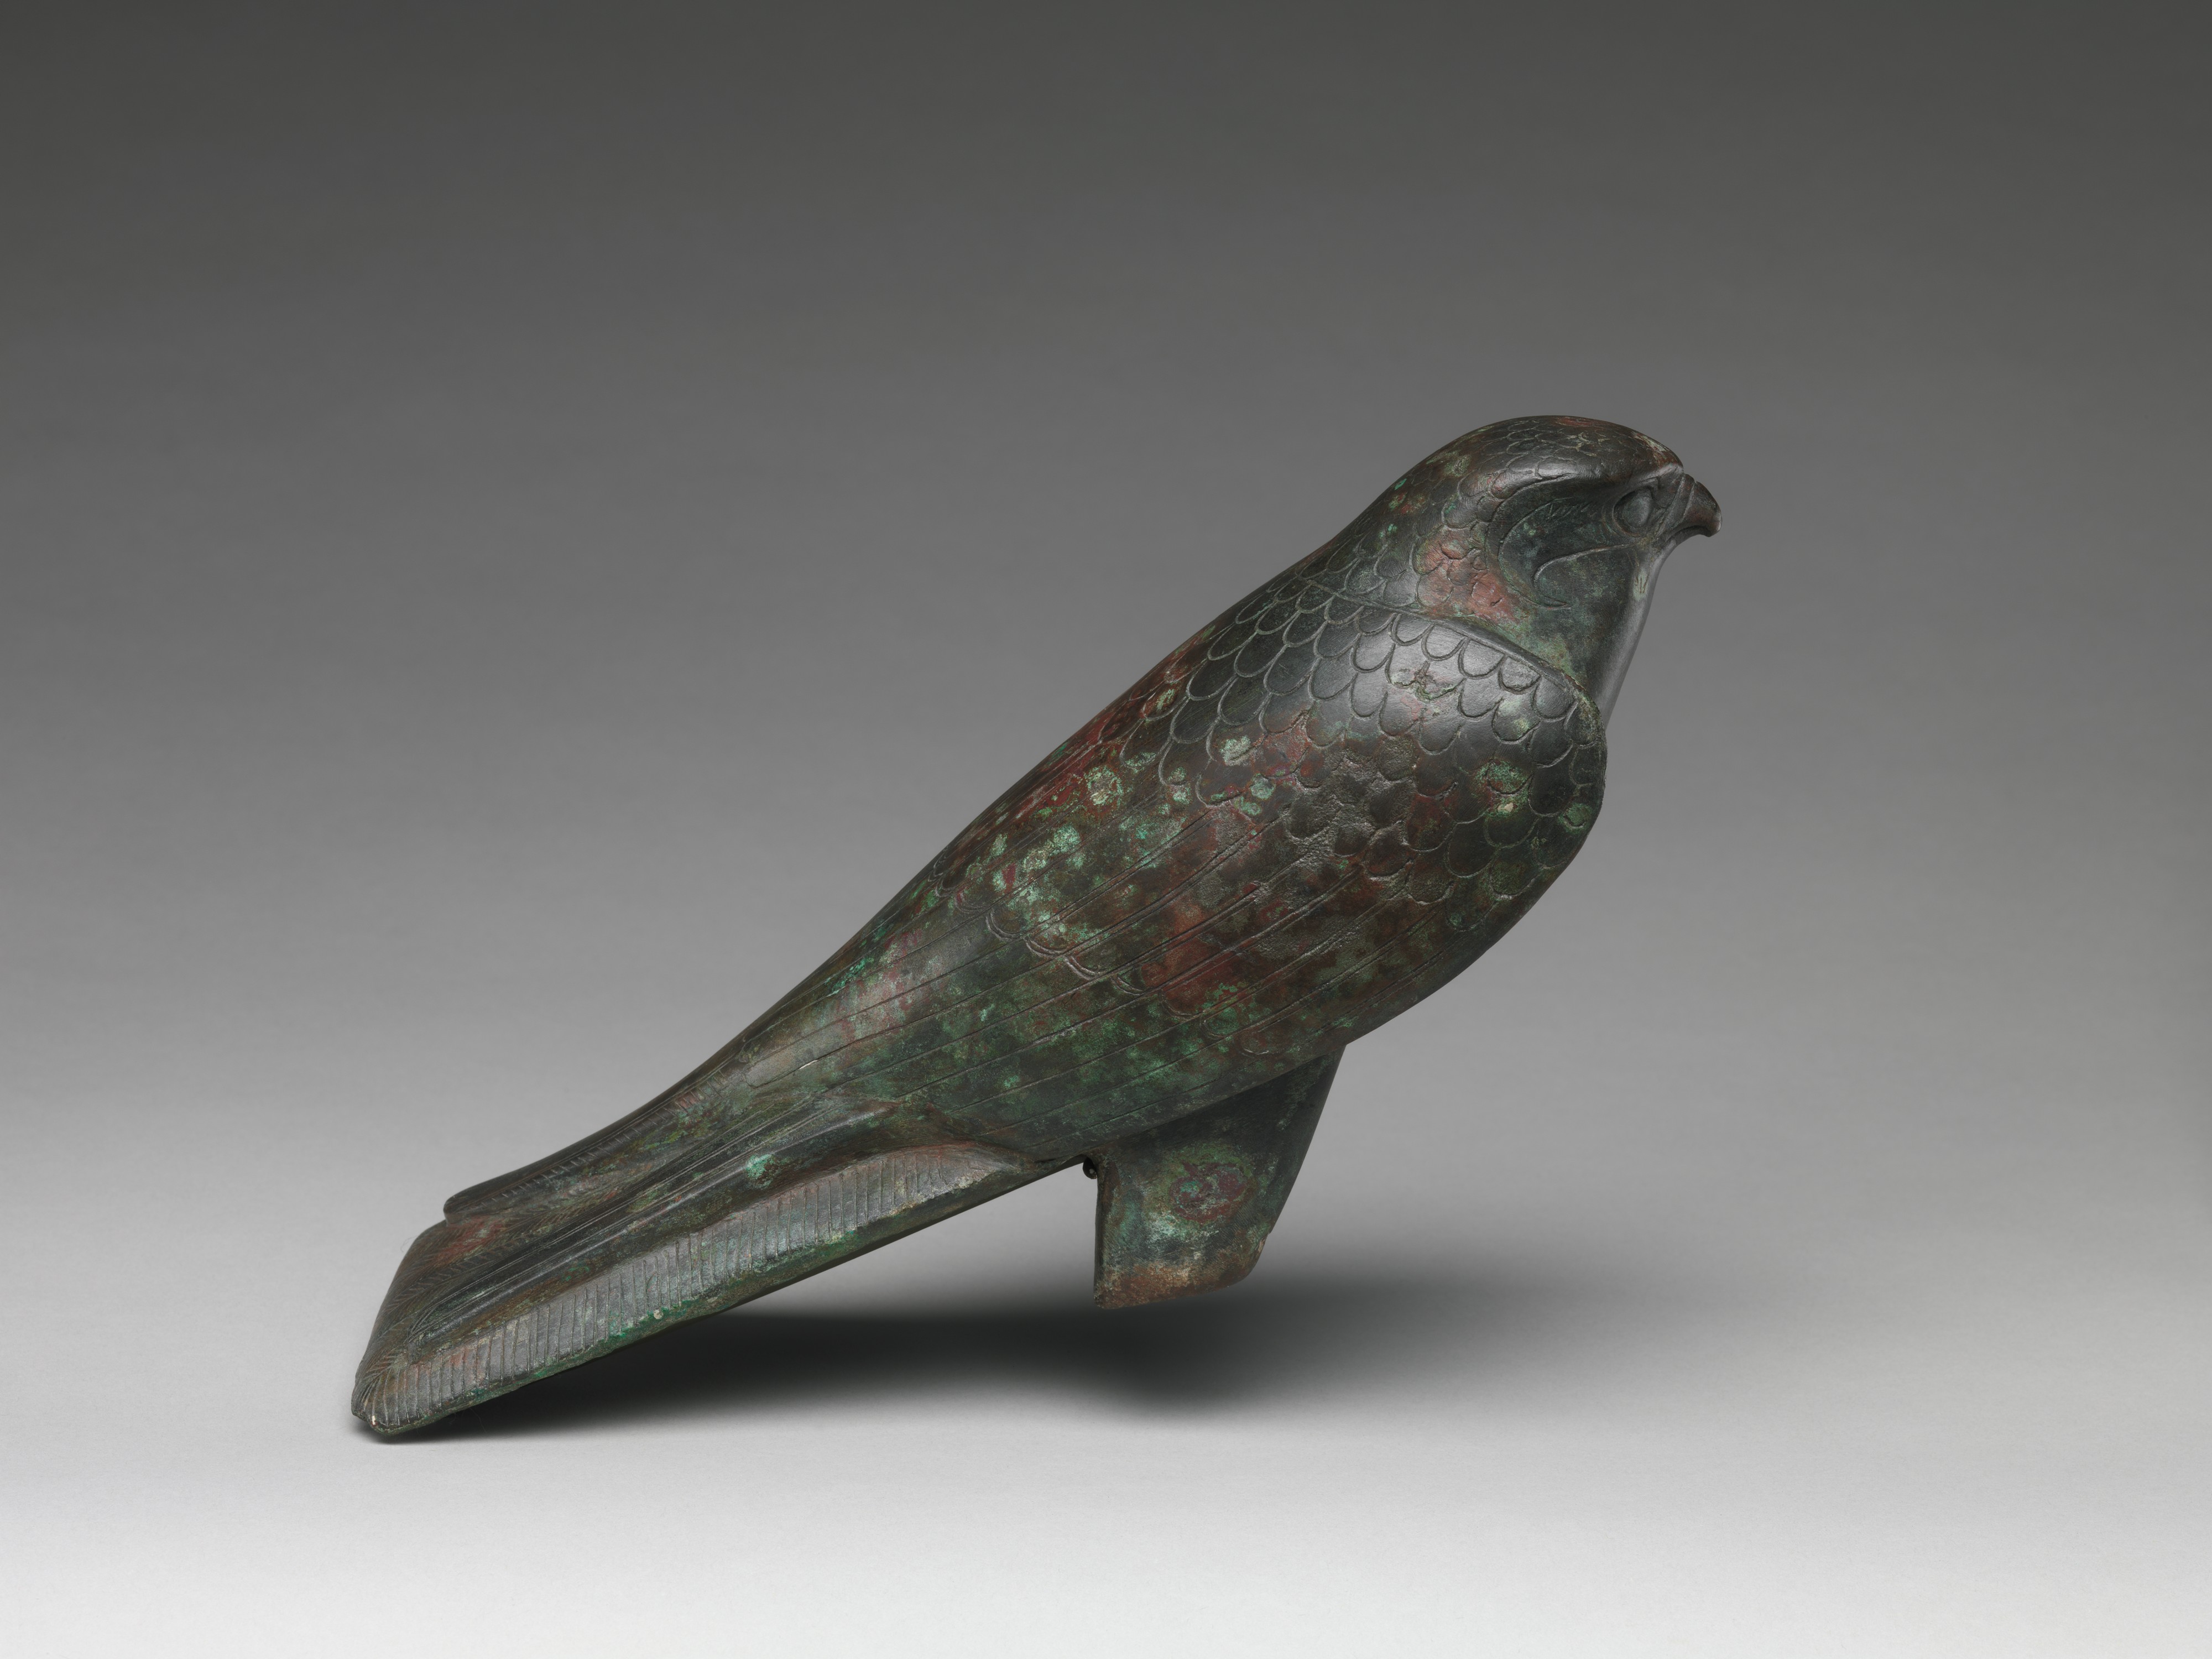 Falcon statue serving as a sarcophagus for a sacred animal by Unknown Artist - 664–30 B.C. - 23.2 x 3.3 x 18.1 cm Metropolitan Museum of Art